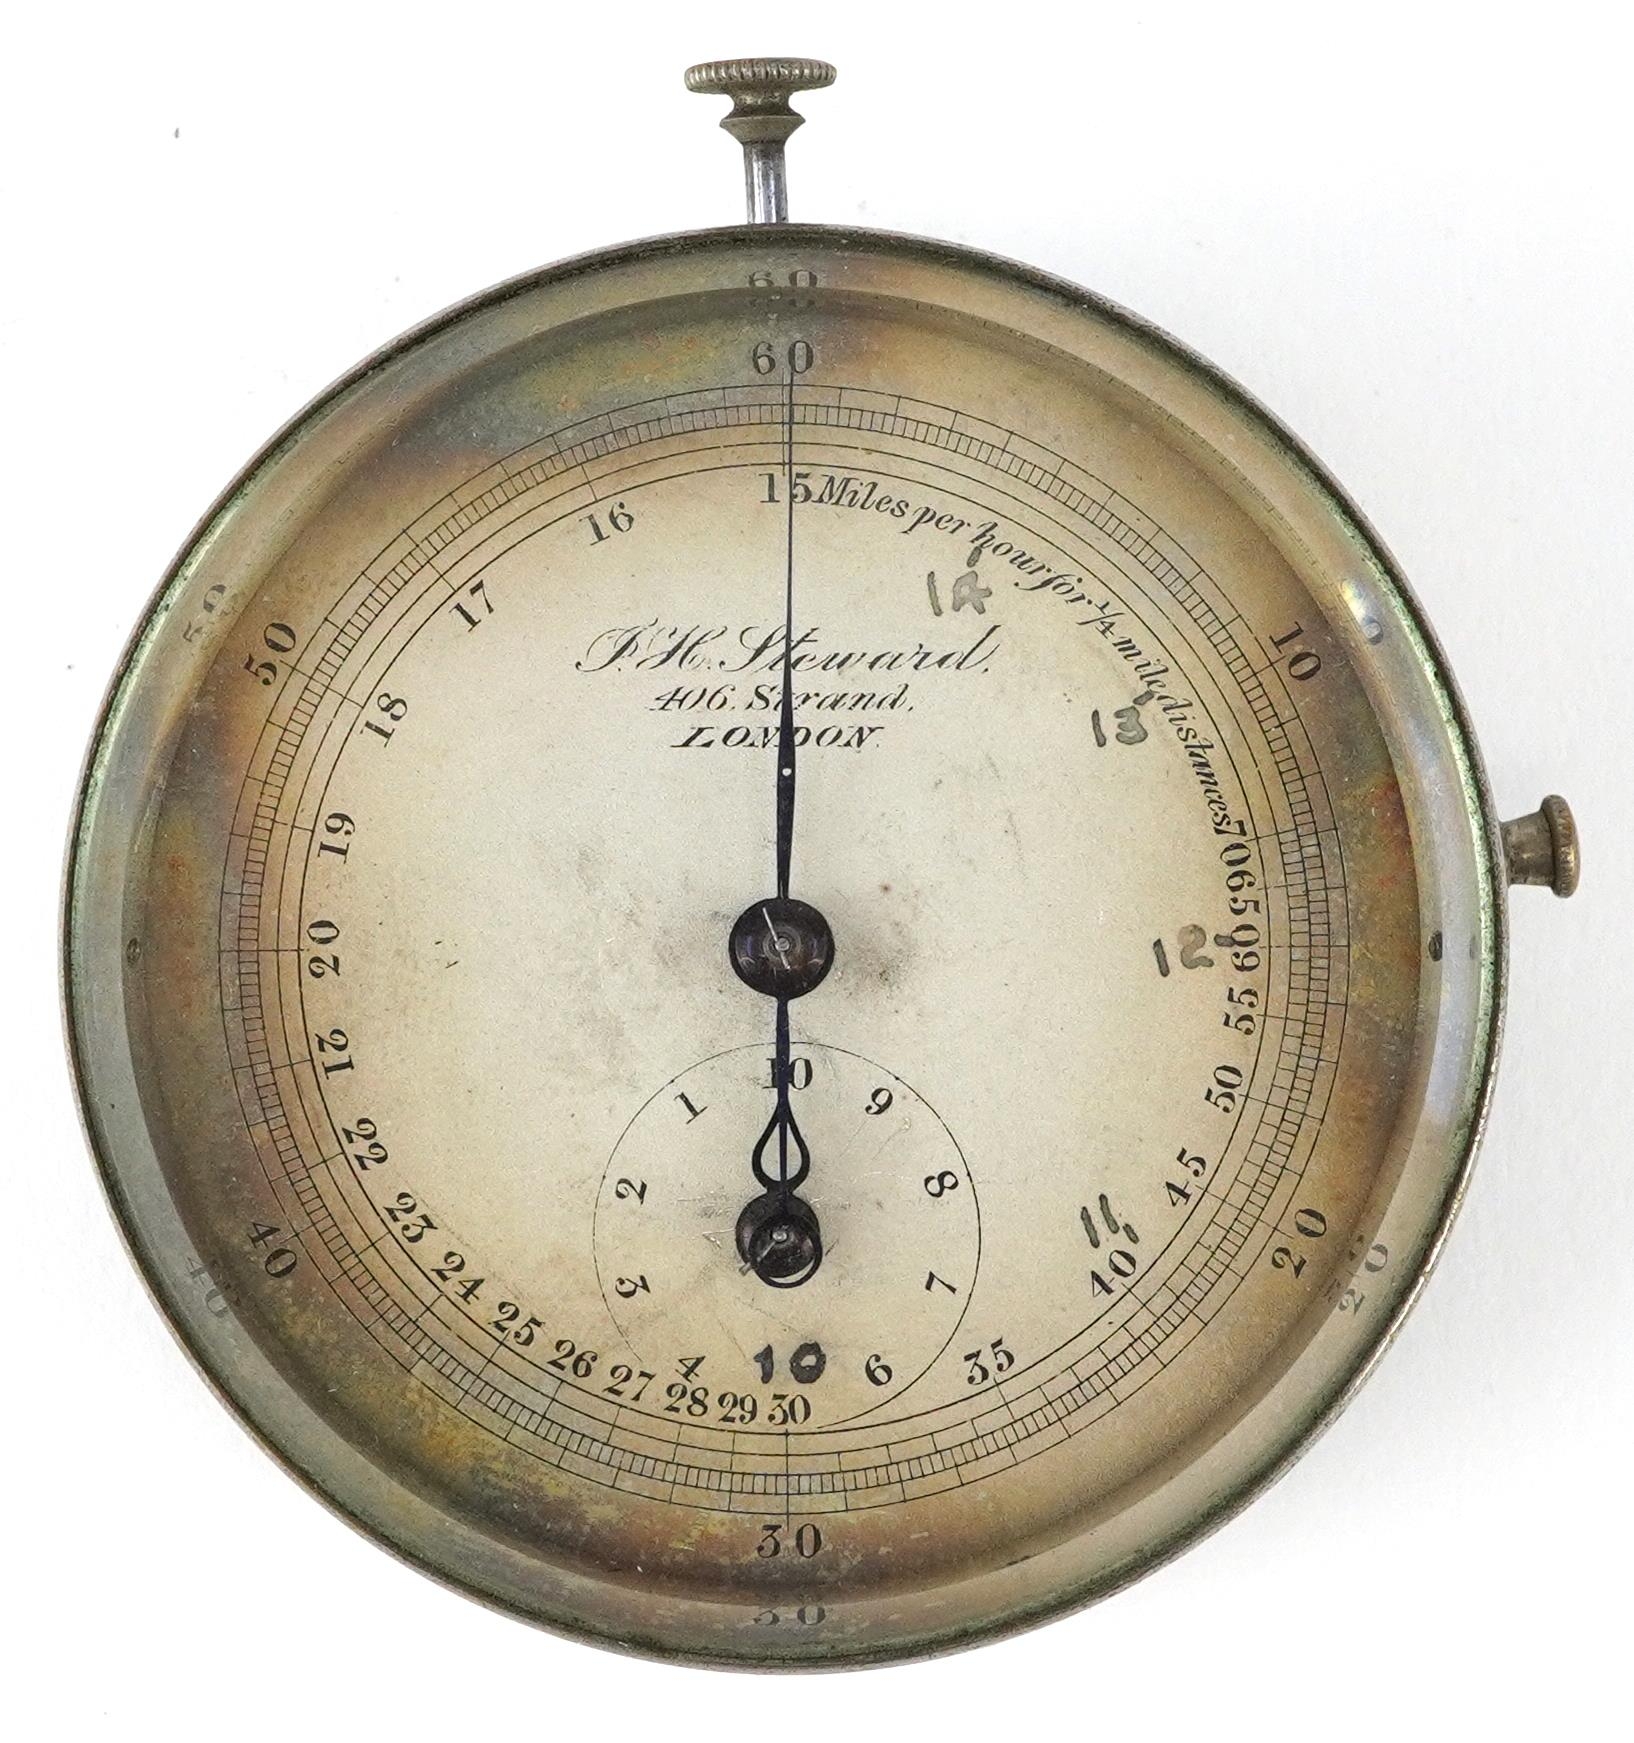 F H Steward, 406 Strand London stopwatch with silvered dial possible military connection, housed - Image 2 of 6